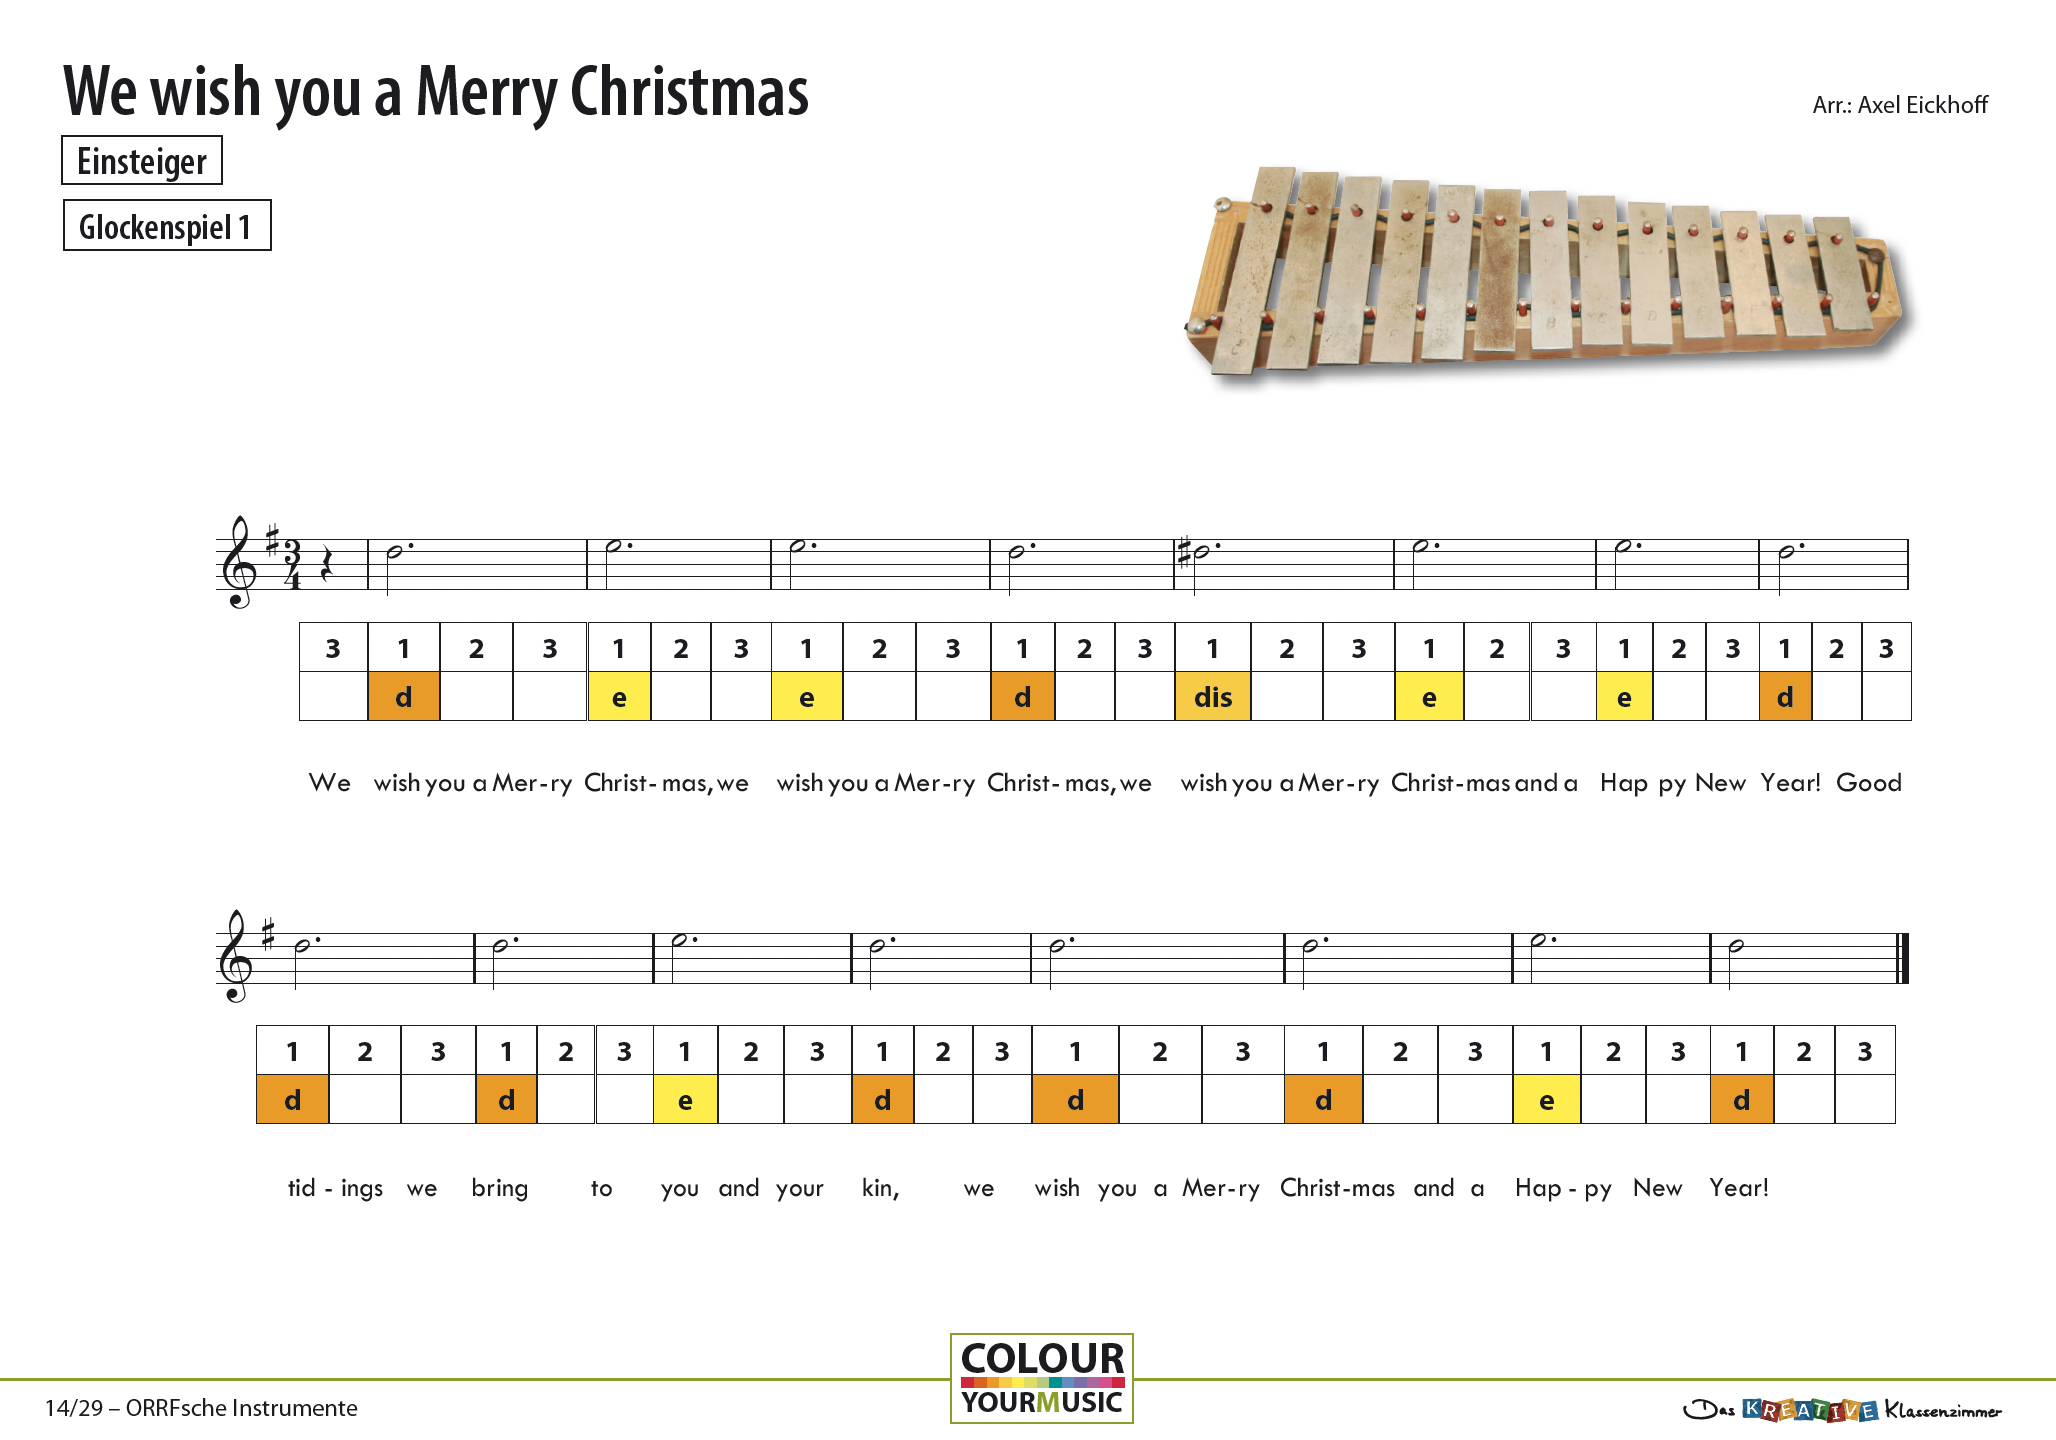 We wish you a Merry Christmas - Orff 